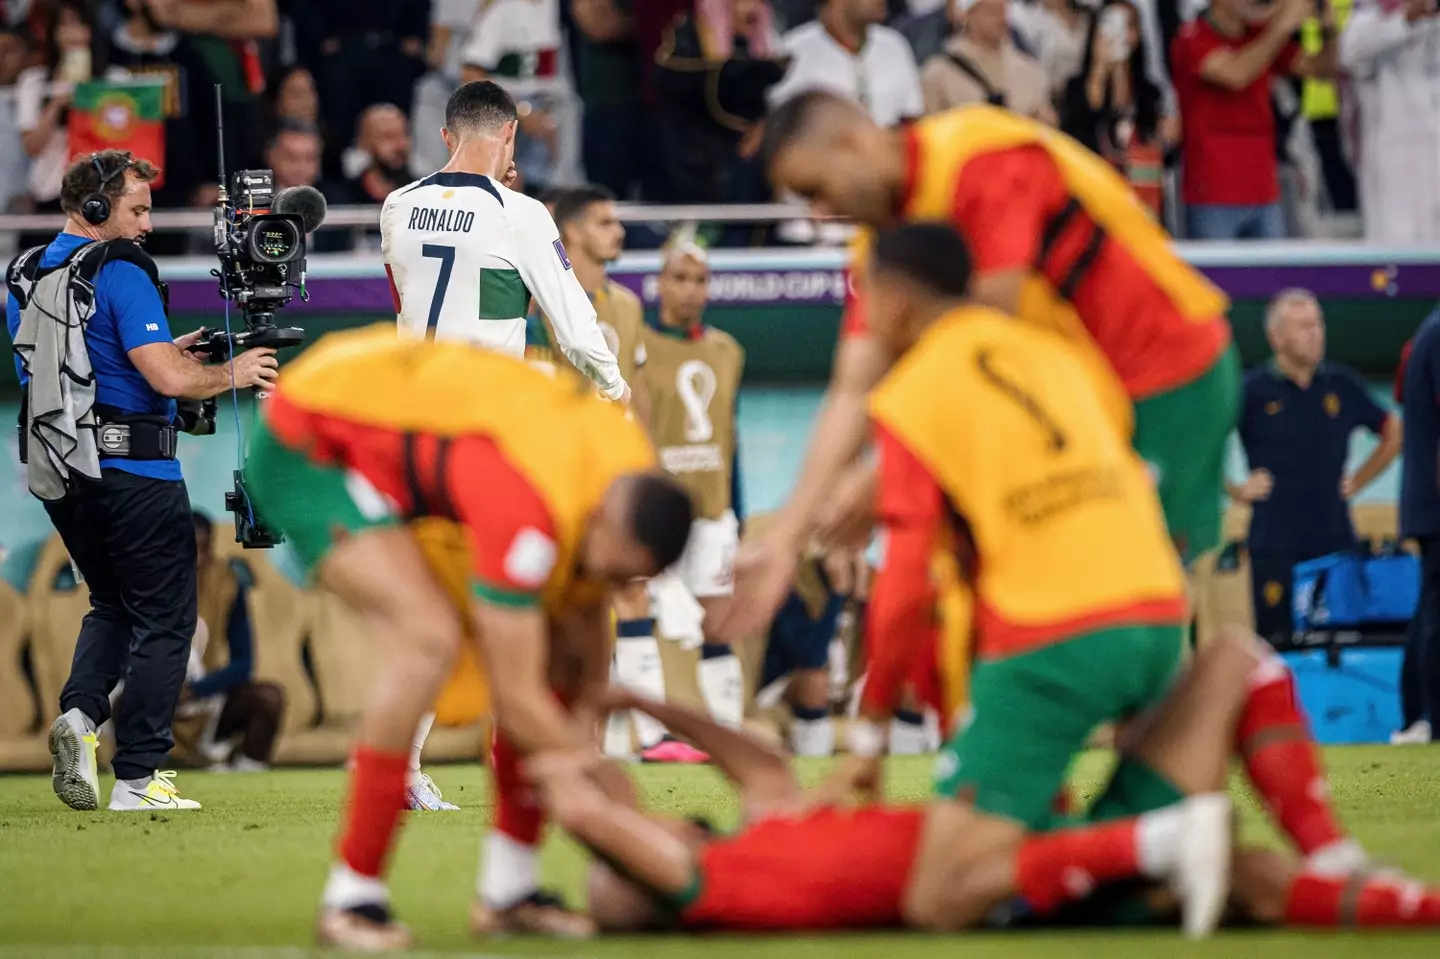 A gutted Ronaldo leaves the pitch as Morocco celebrate. Image: Alamy